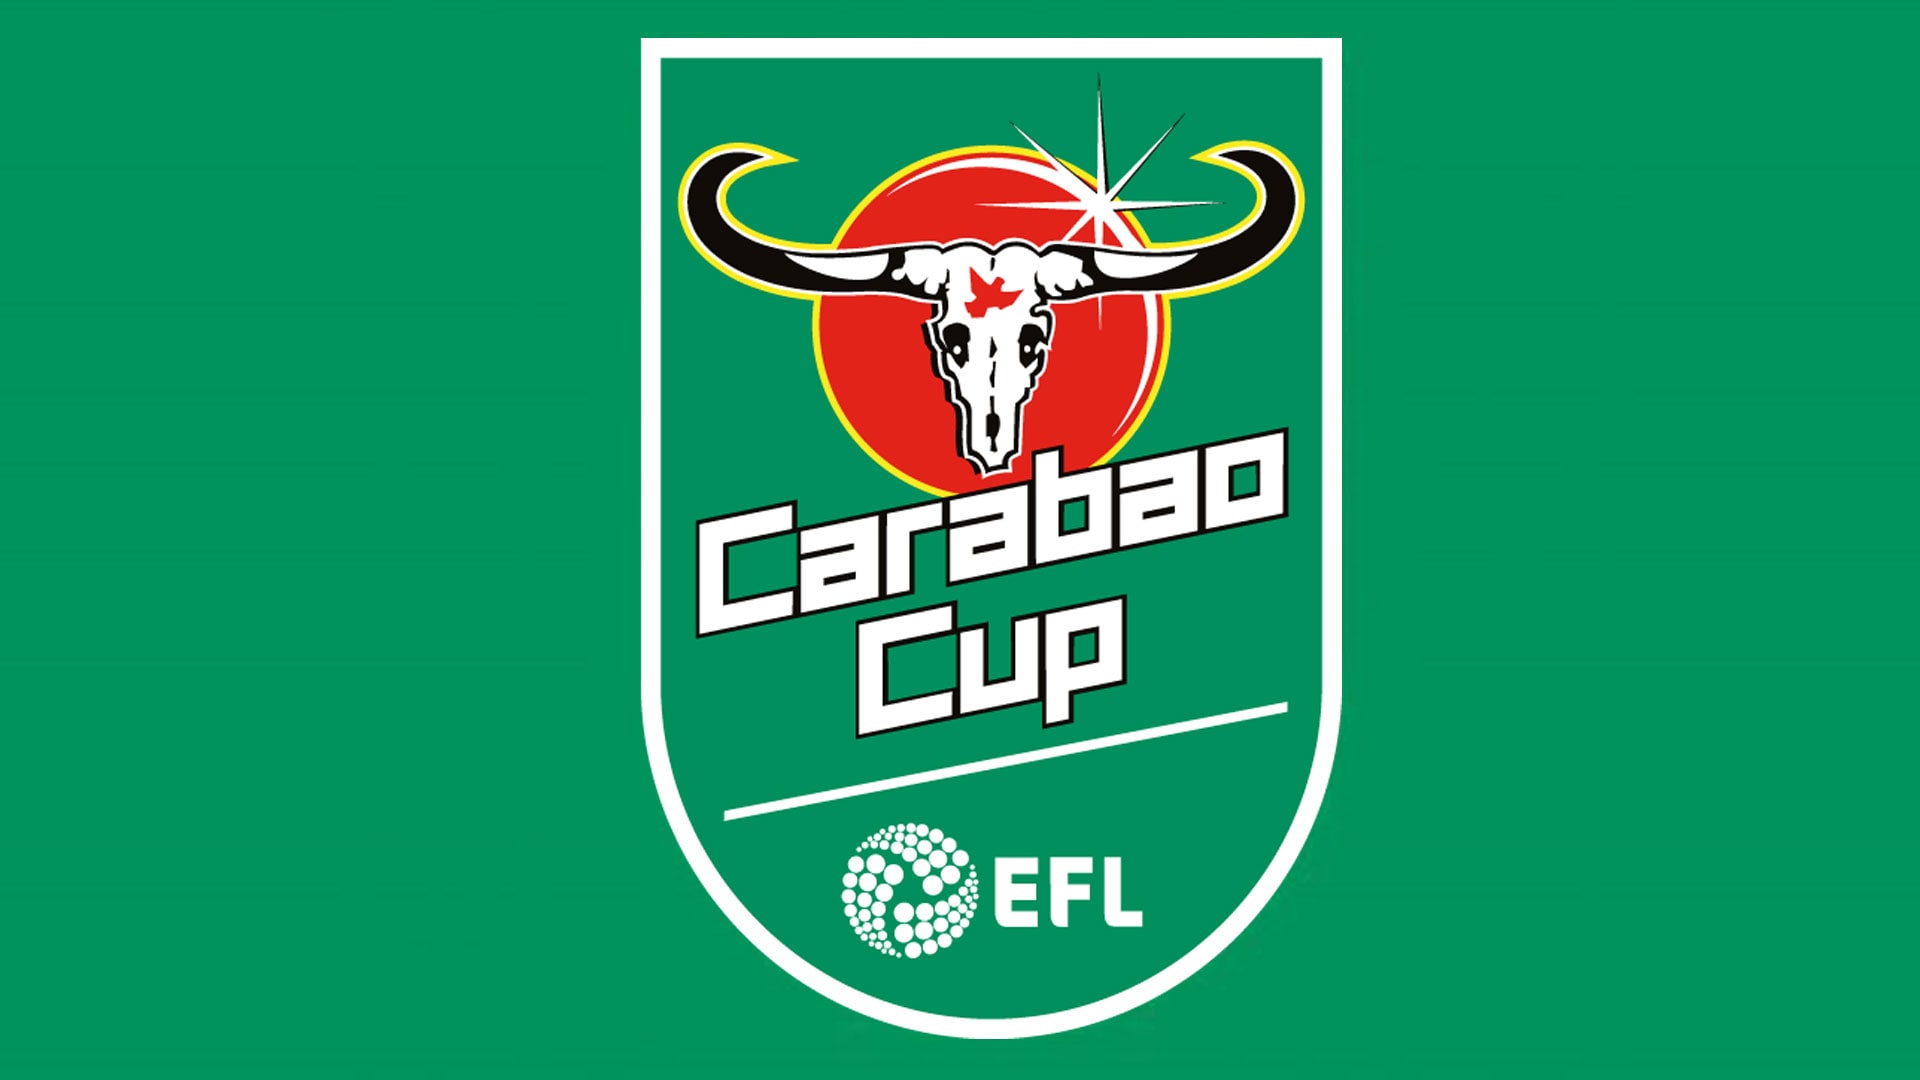 Broadcaster Mark Chapman to join Sky Sports to present the Carabao Cup